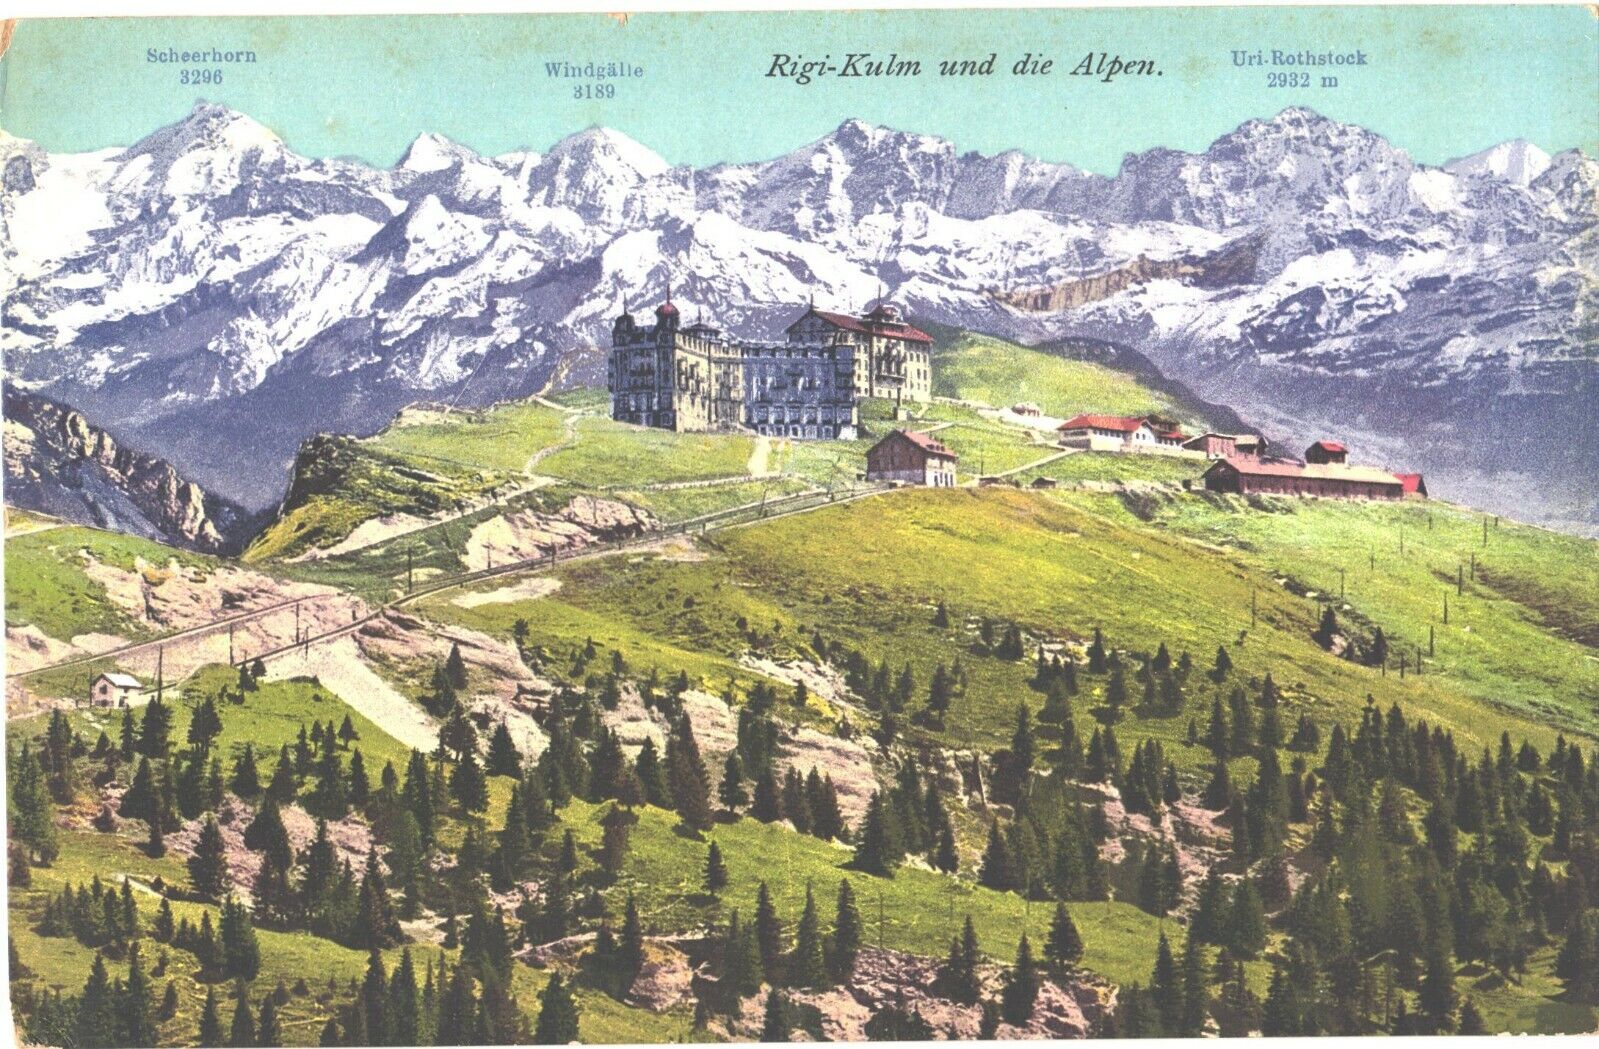 View Of Rigi Kulm, The Highest Point And The Alps In Switzerland Postcard